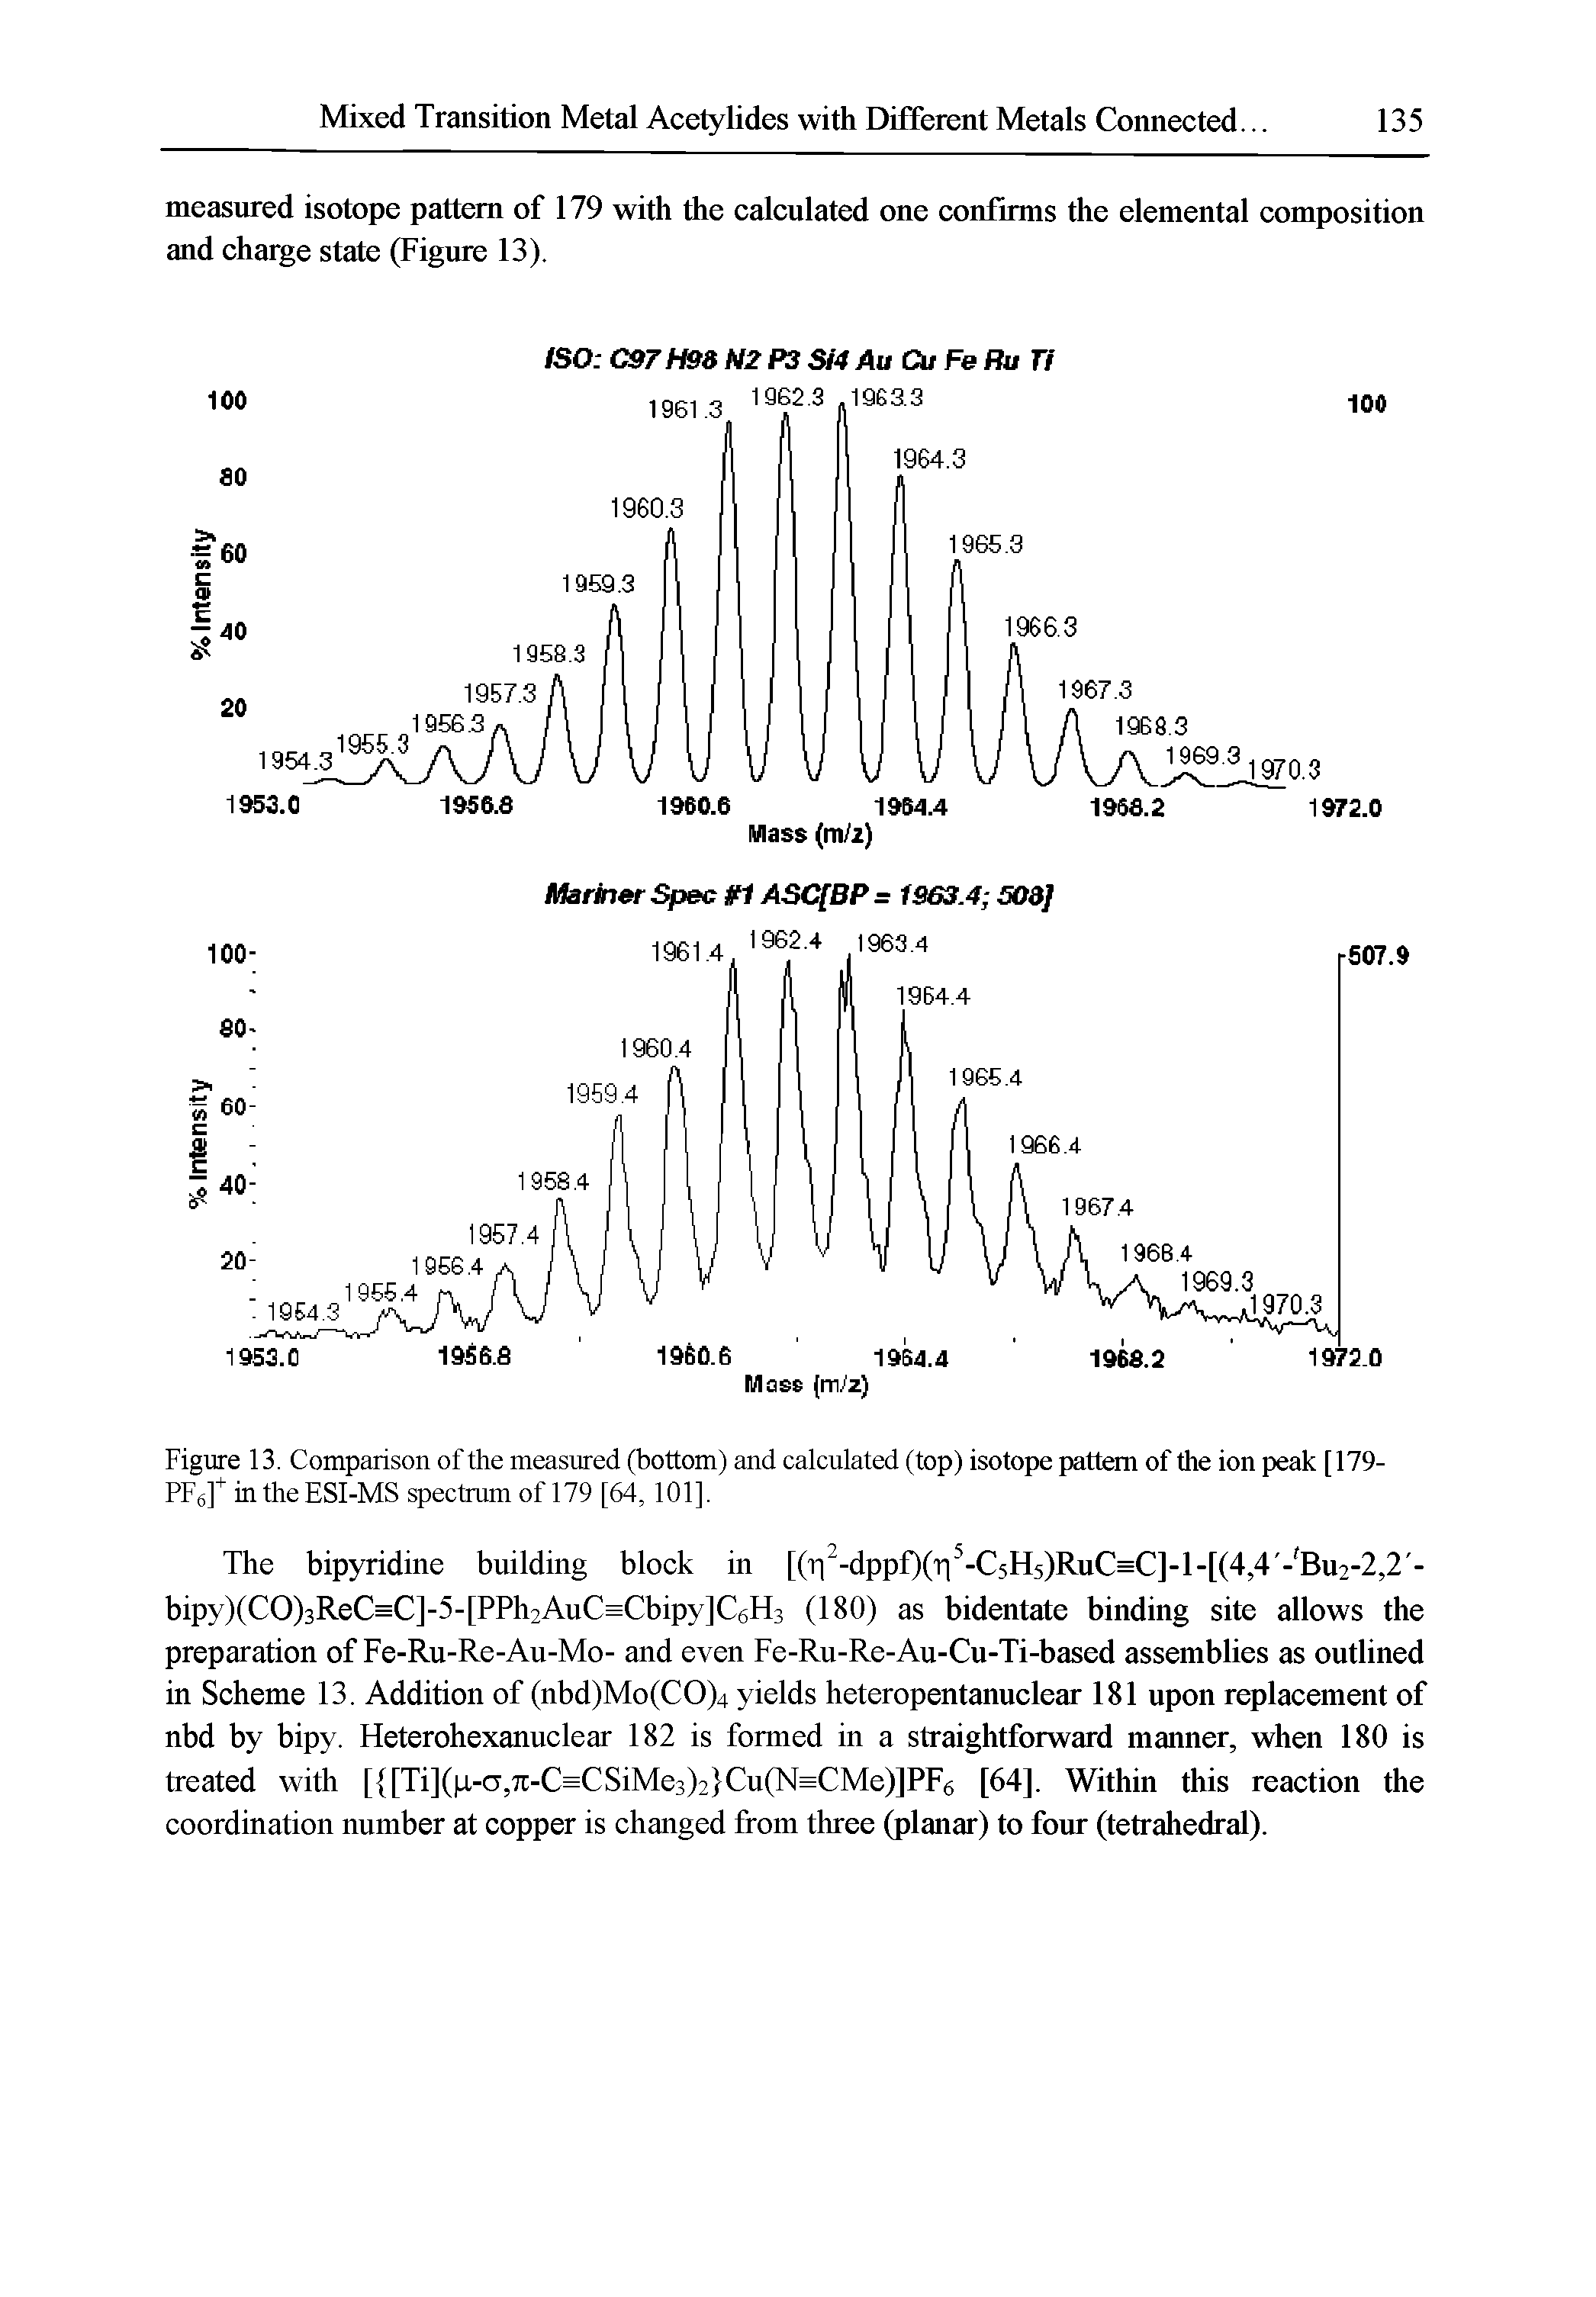 Figure 13. Comparison of the measured (bottom) and calculated (top) isotope pattern of the ion peak [179-PFg] in the ESI-MS spectrum of 179 [64,101].